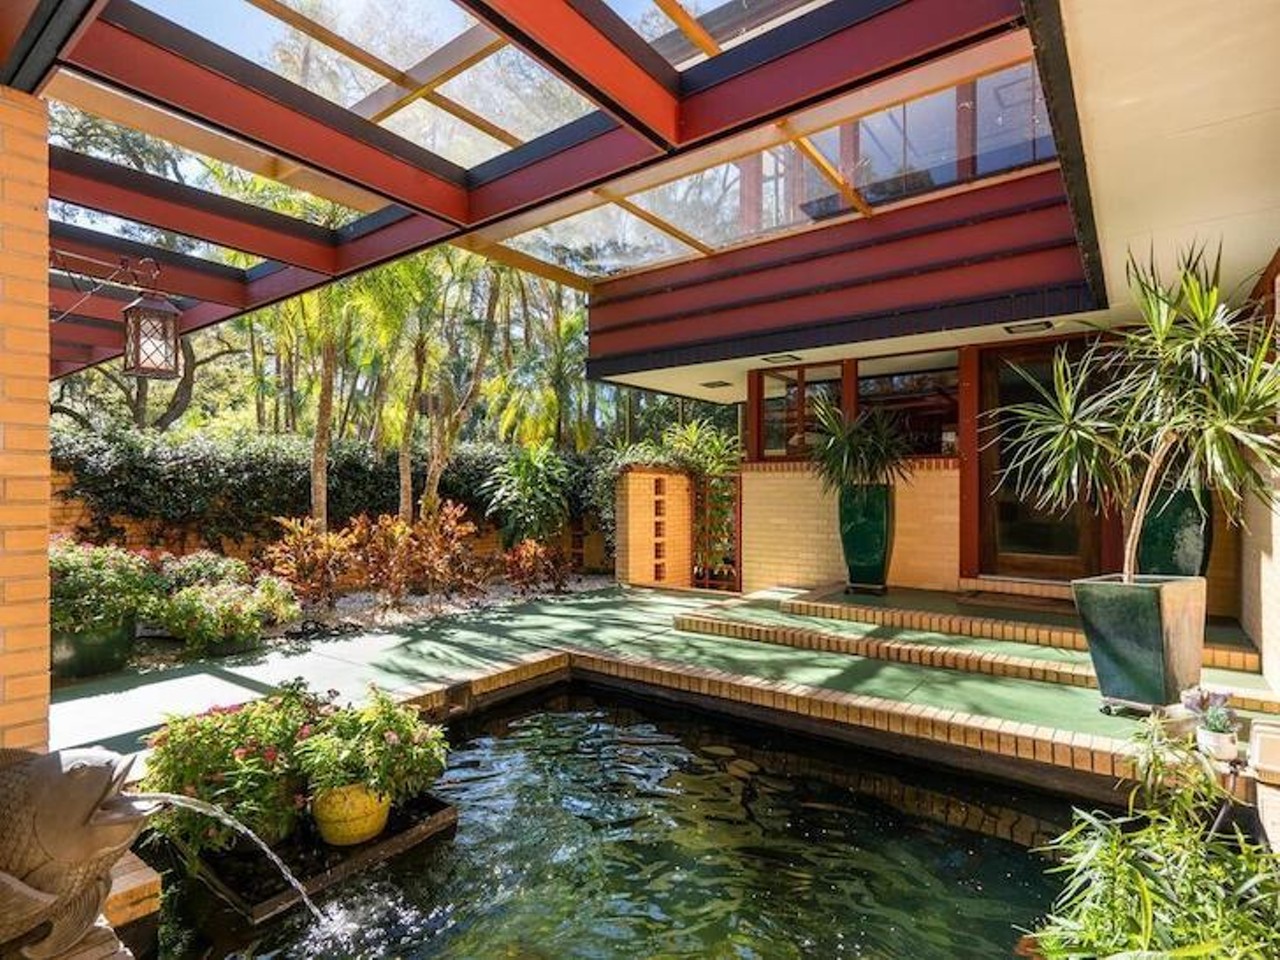 A Clearwater Usonian-style house built by a Frank Lloyd Wright protege is now for sale